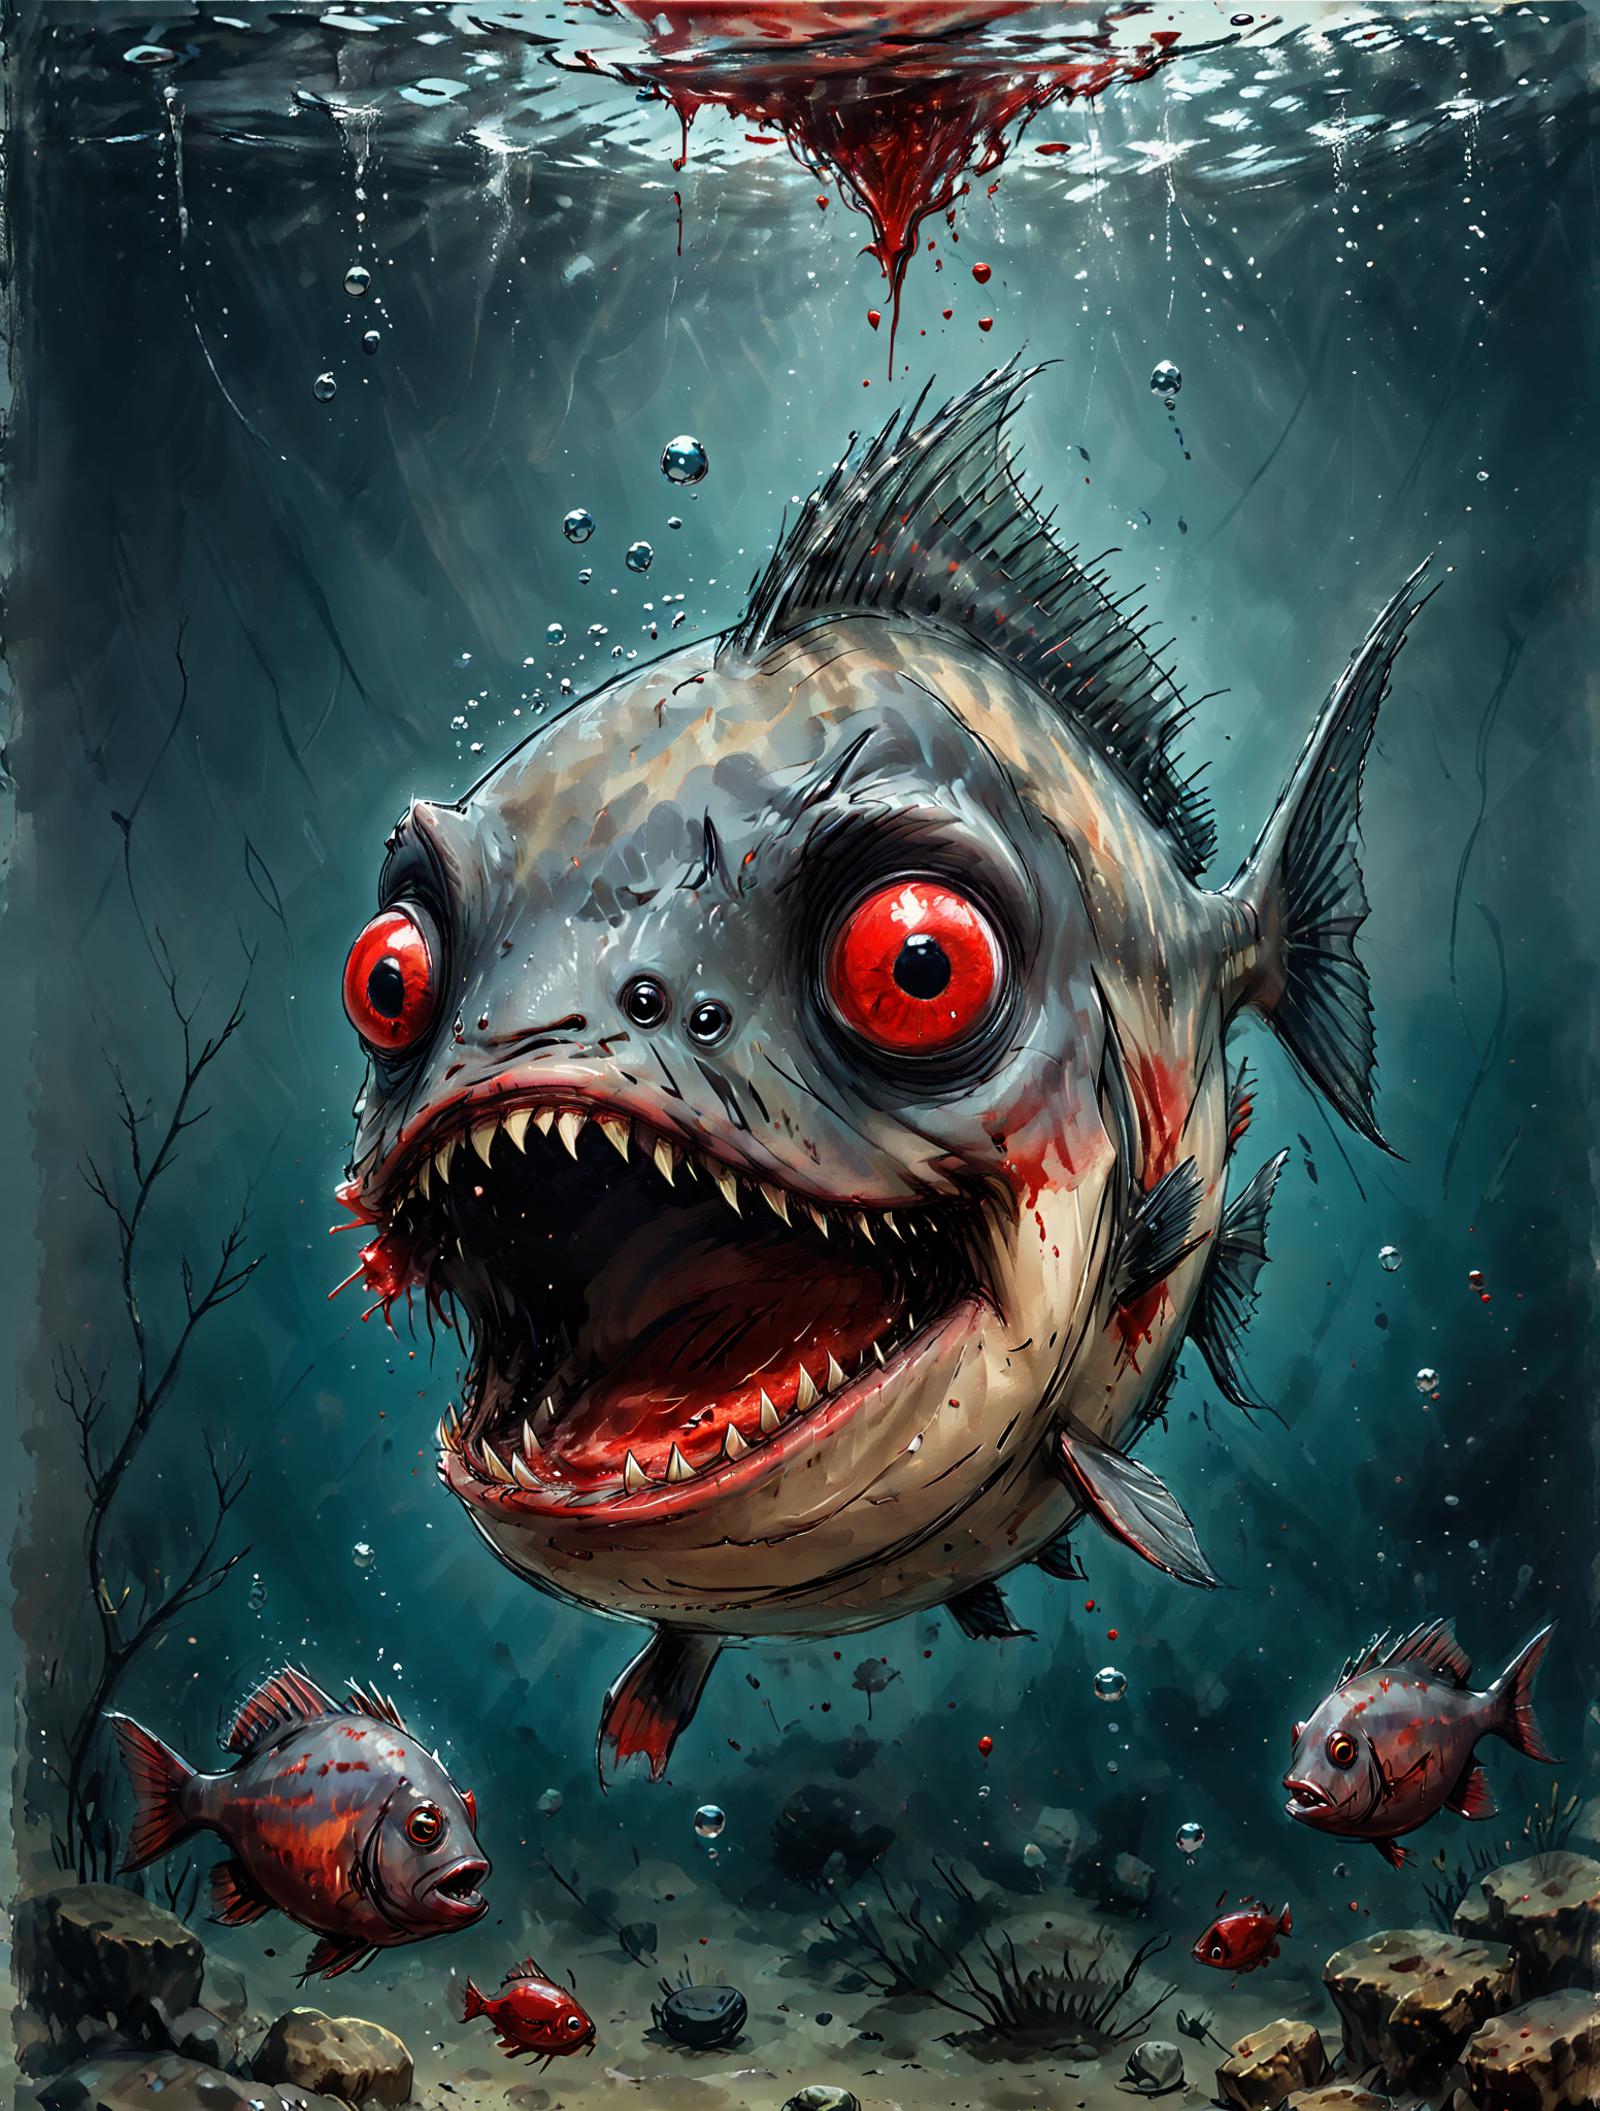 The Fish with Red Eyes - A Frightening Creature in the Dark Water